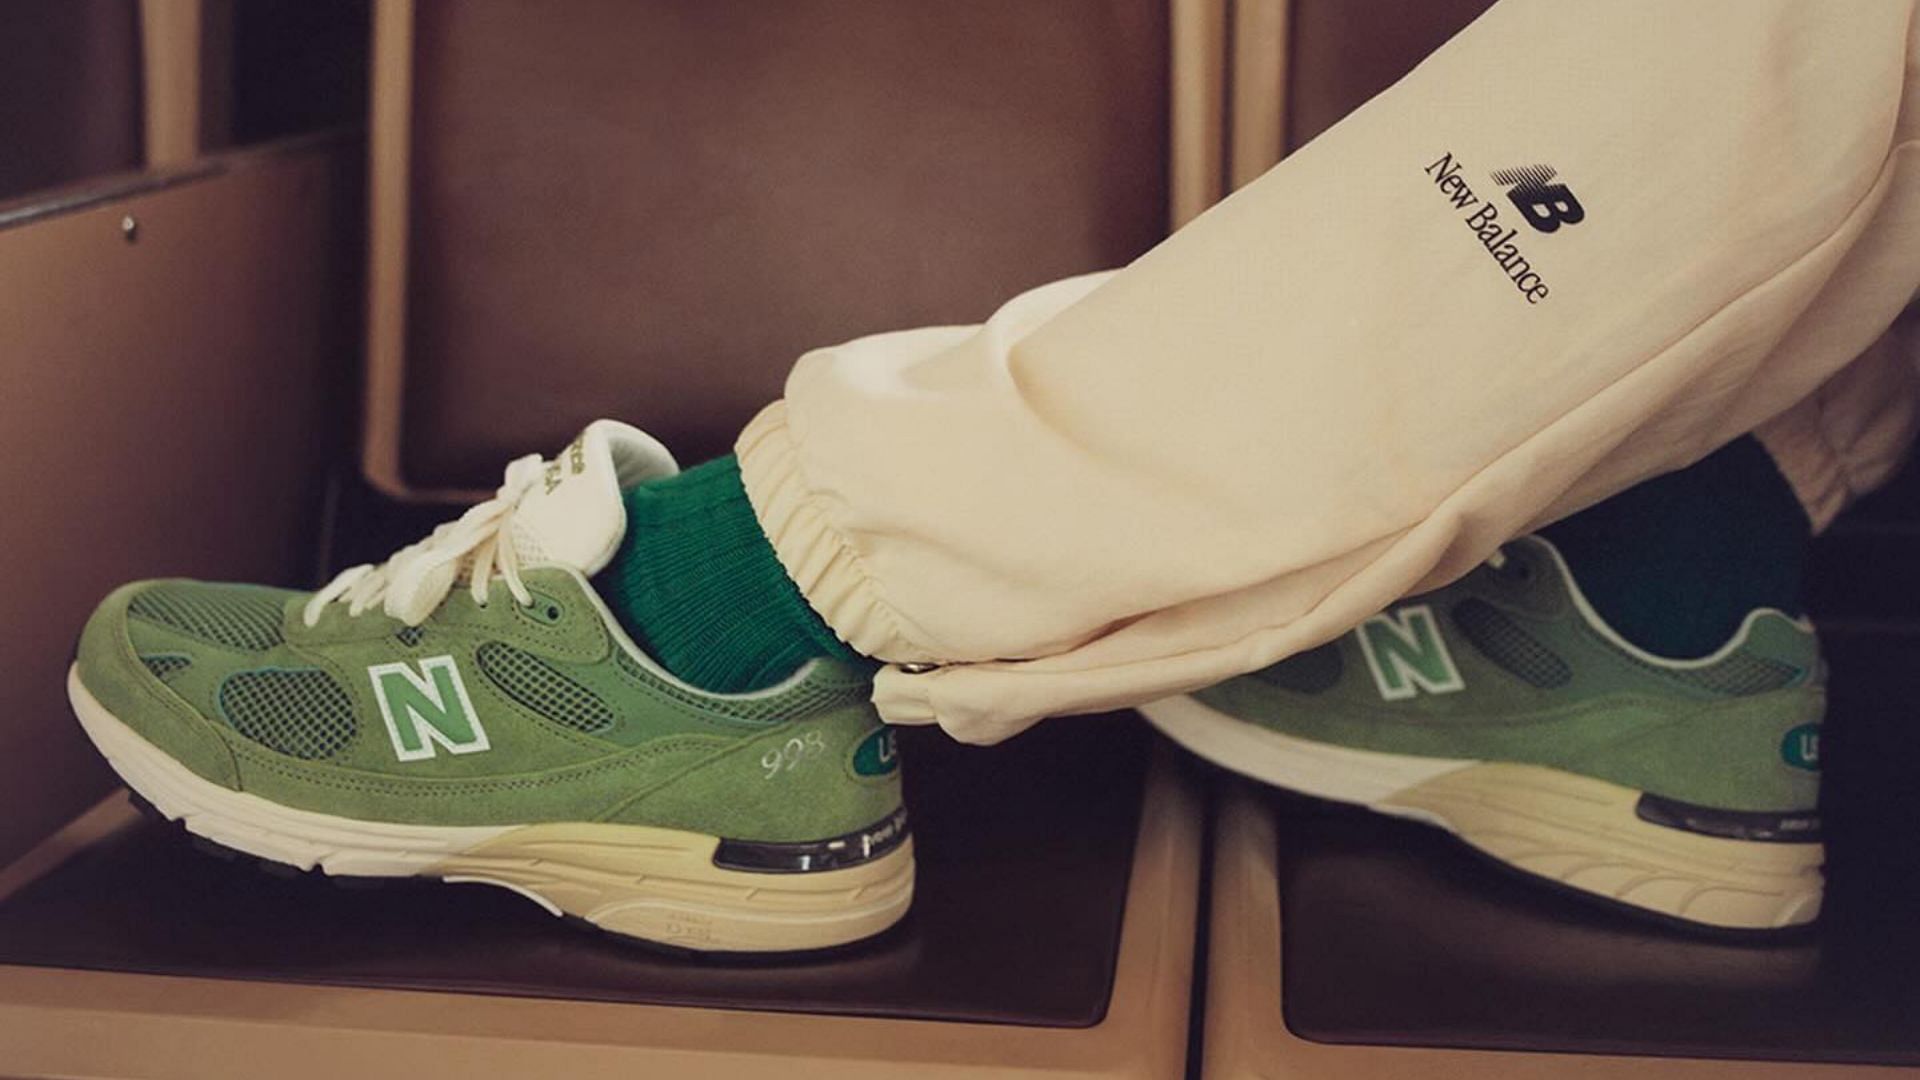 New Balance 993 Chive sneakers